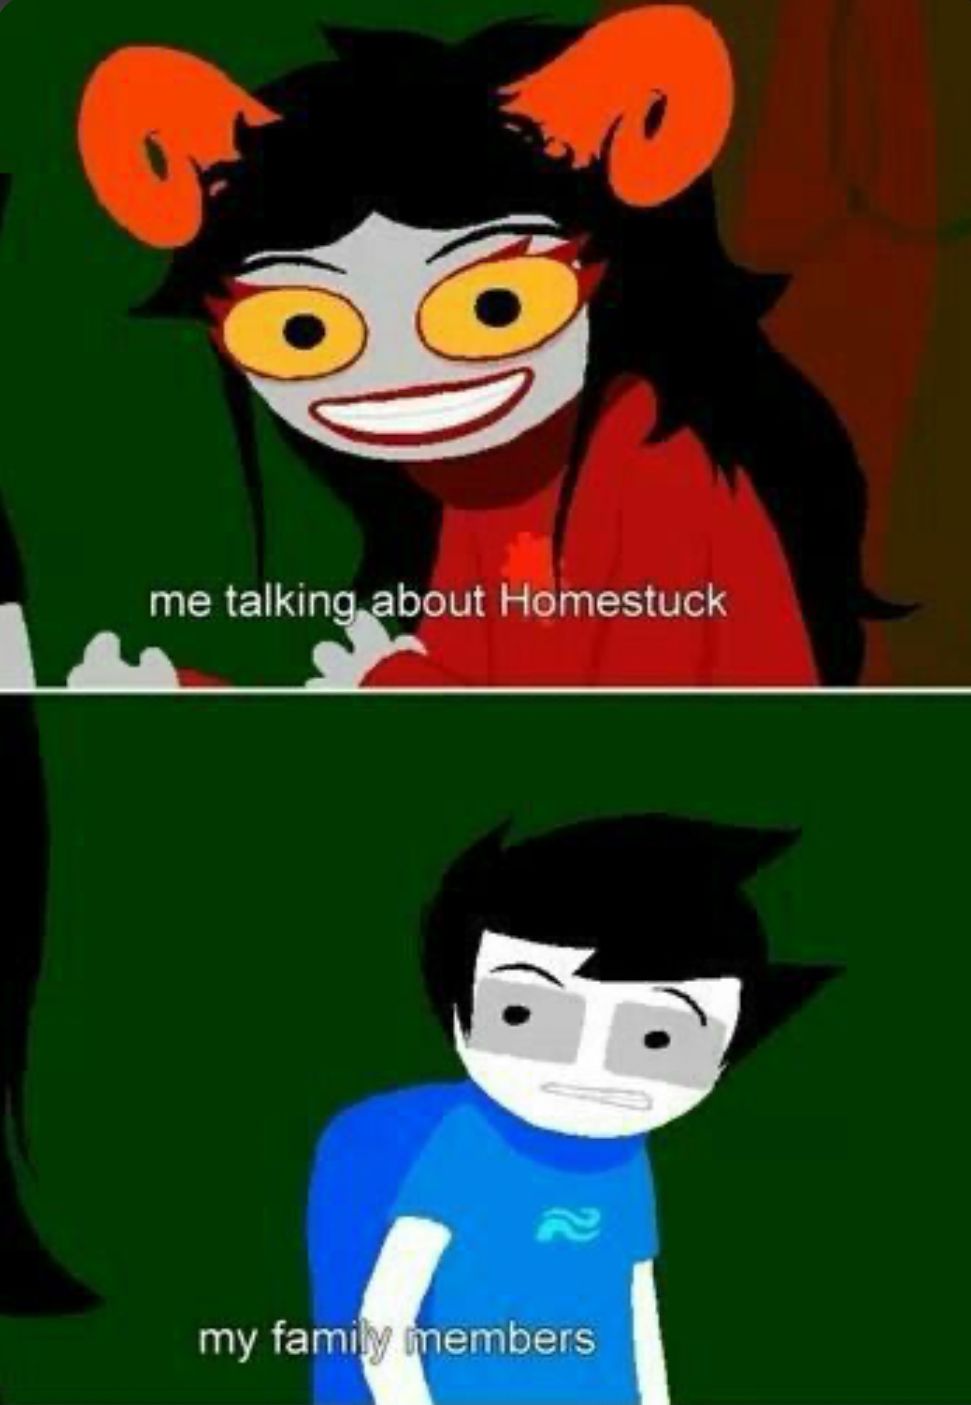 me talking about Homestuck
my family members